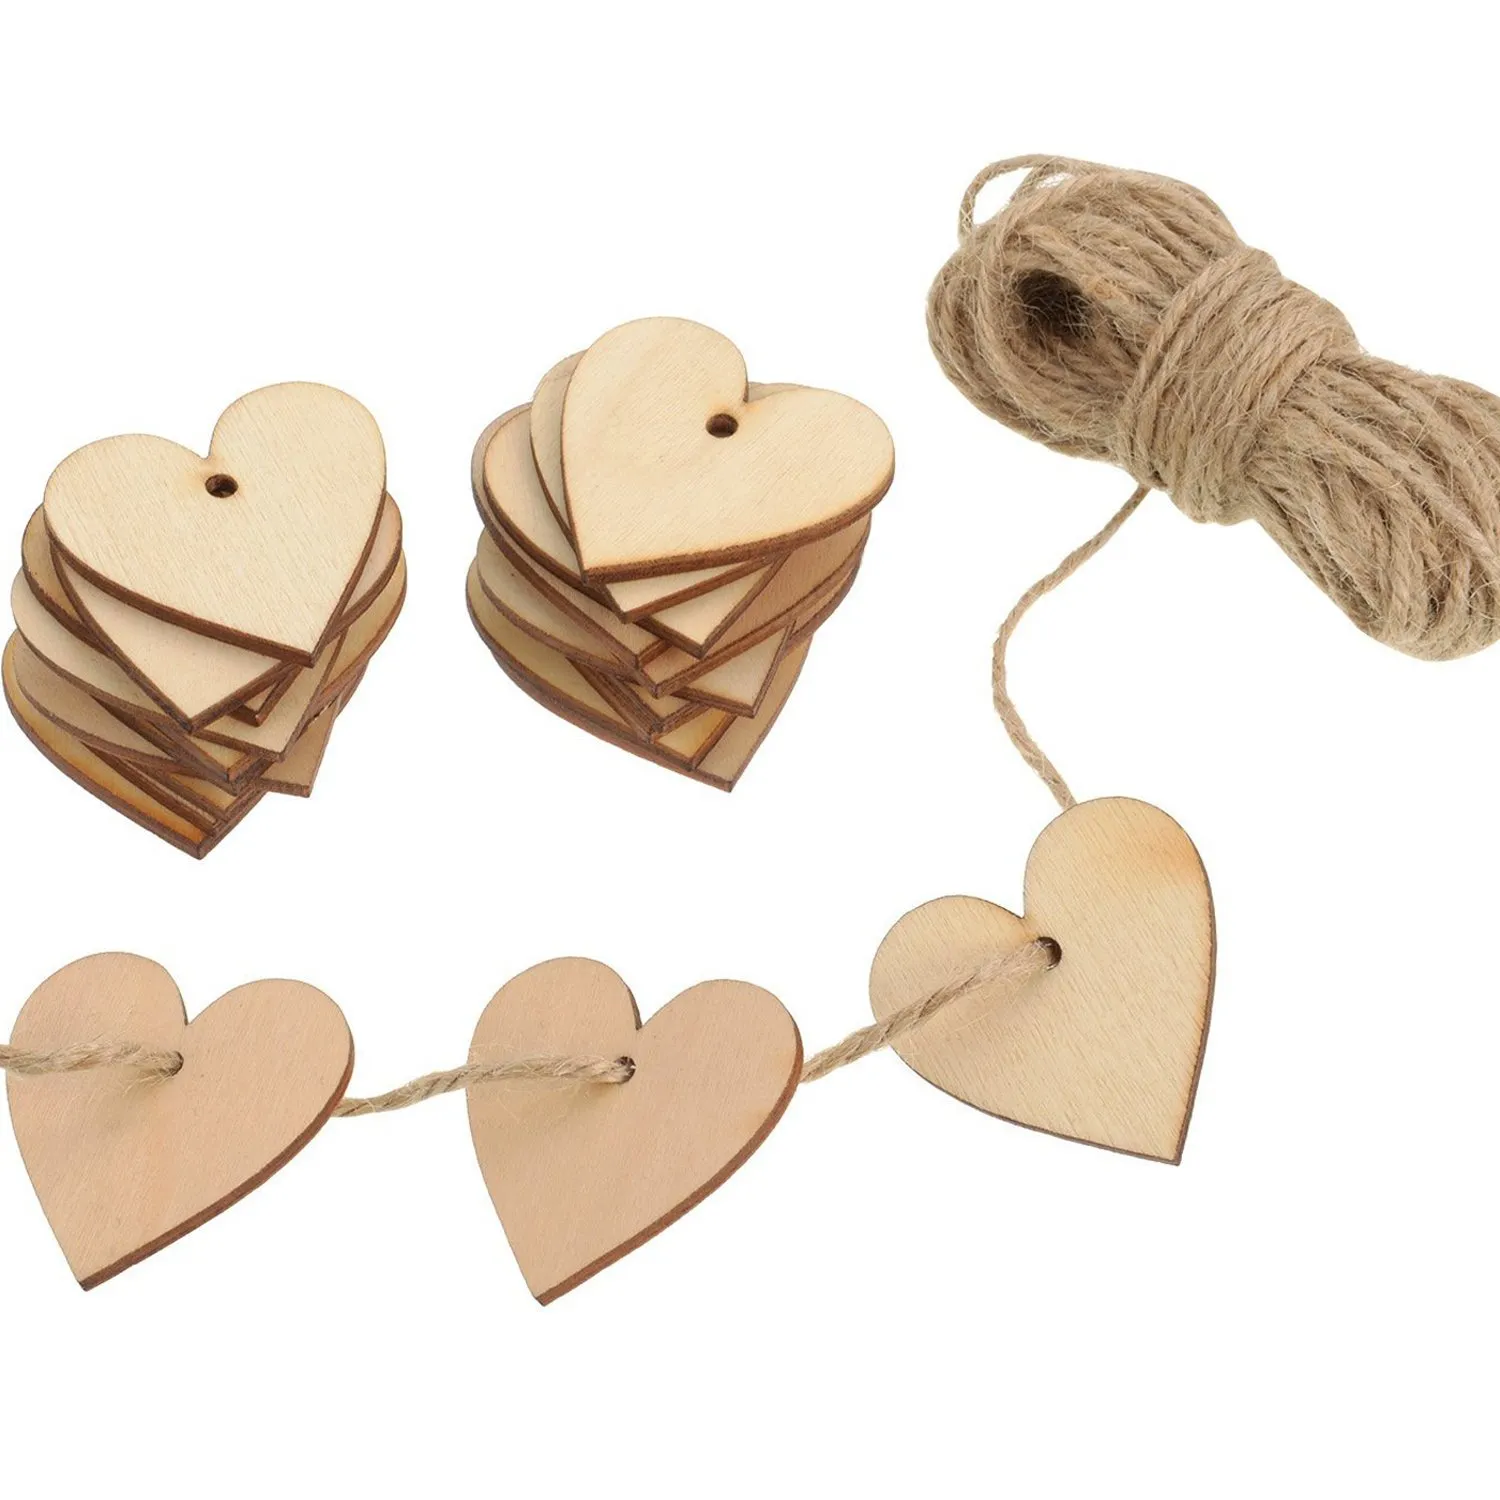 100 Packed Wood Heart Wedding Hanging Home Decor Gifts Ornament